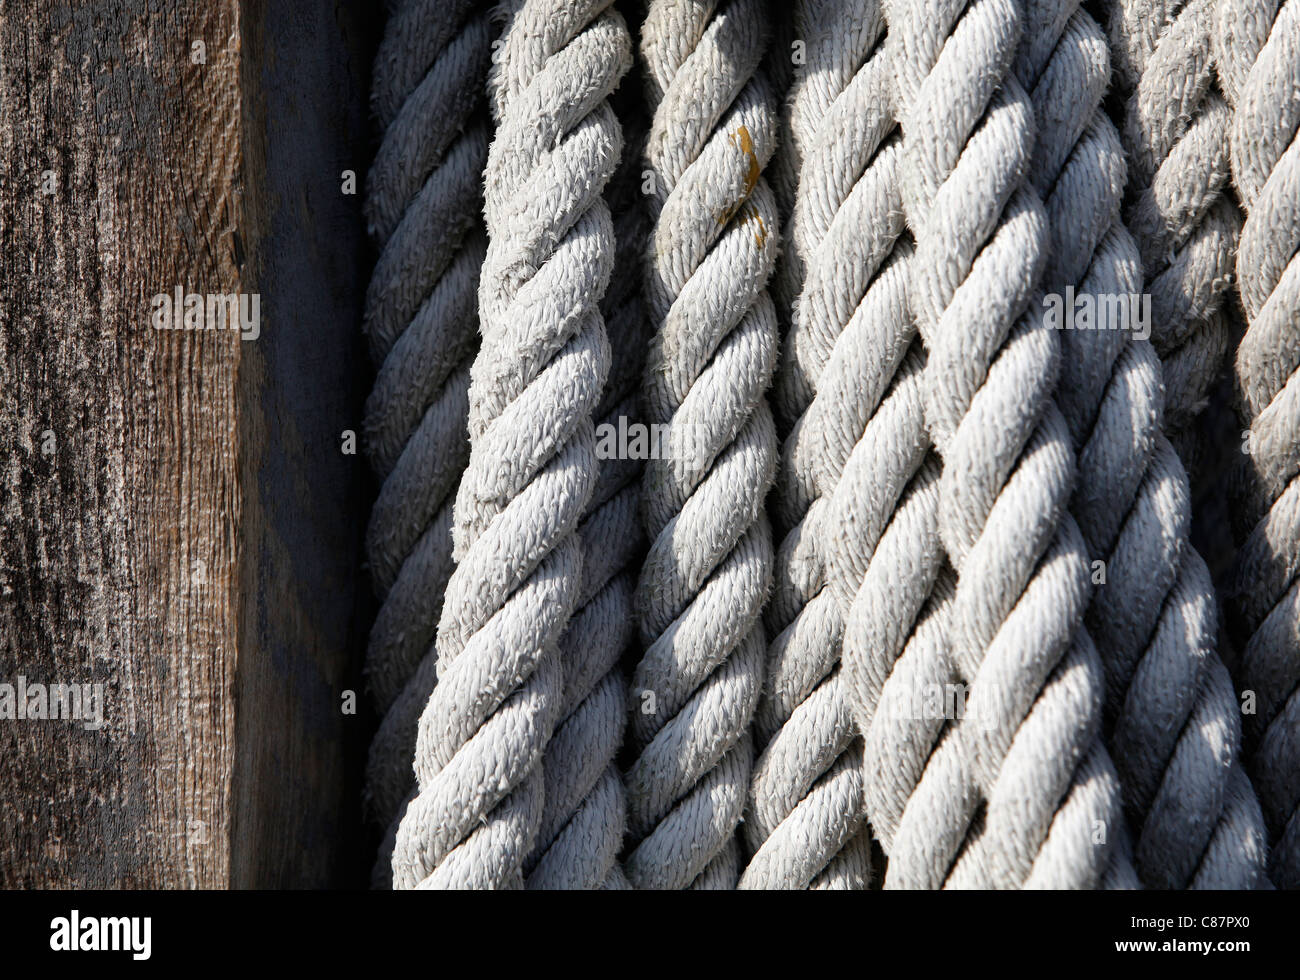 Coiled ship's rope in the Salem Maritime National Historic site, Salem, Massachusetts Stock Photo